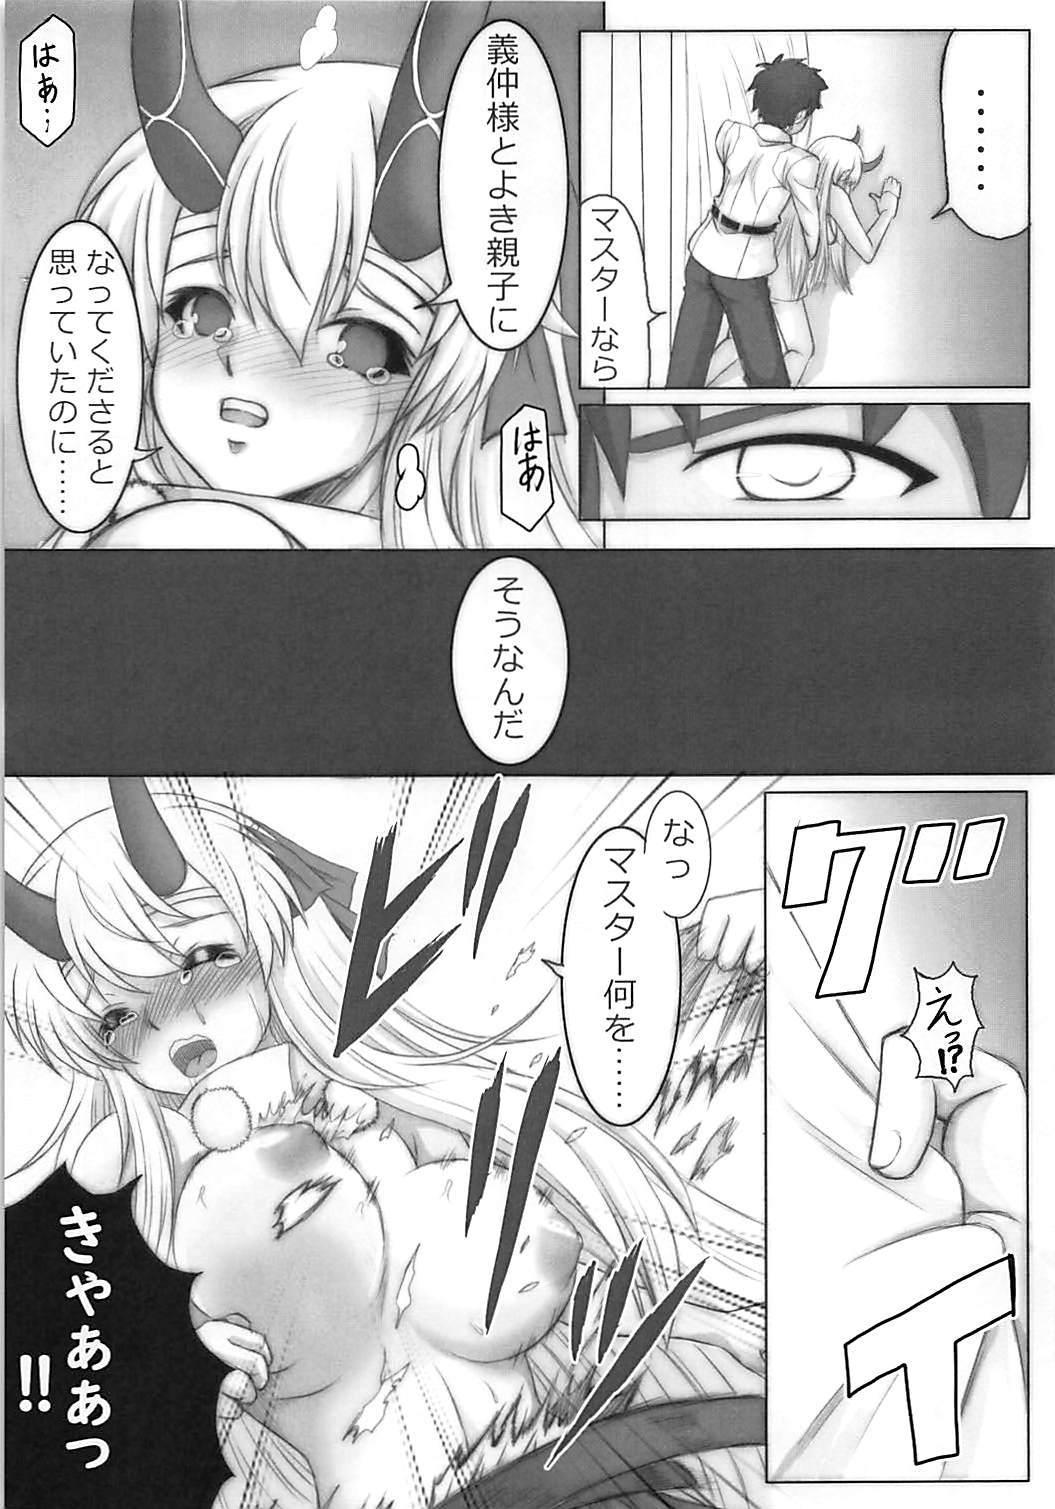 Home TOMOE Sange - Fate grand order Jerking - Page 8